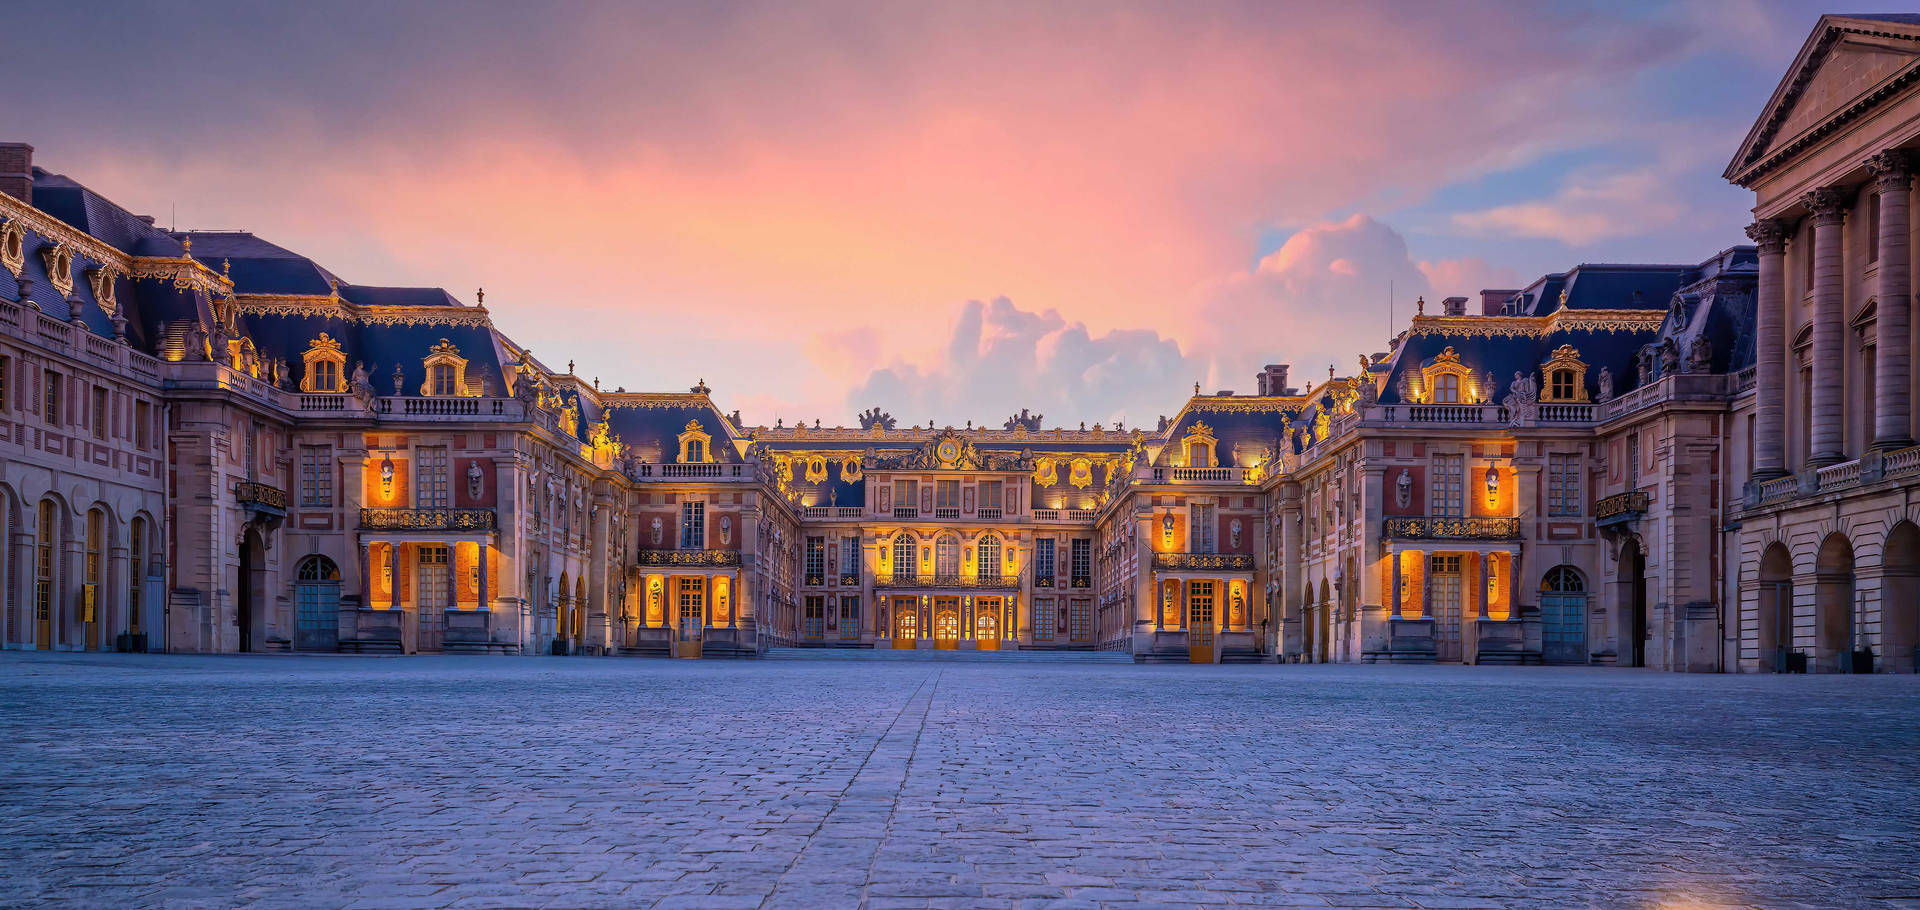 Sunset At The Marble Courtyard At The Palace Of Versailles Background